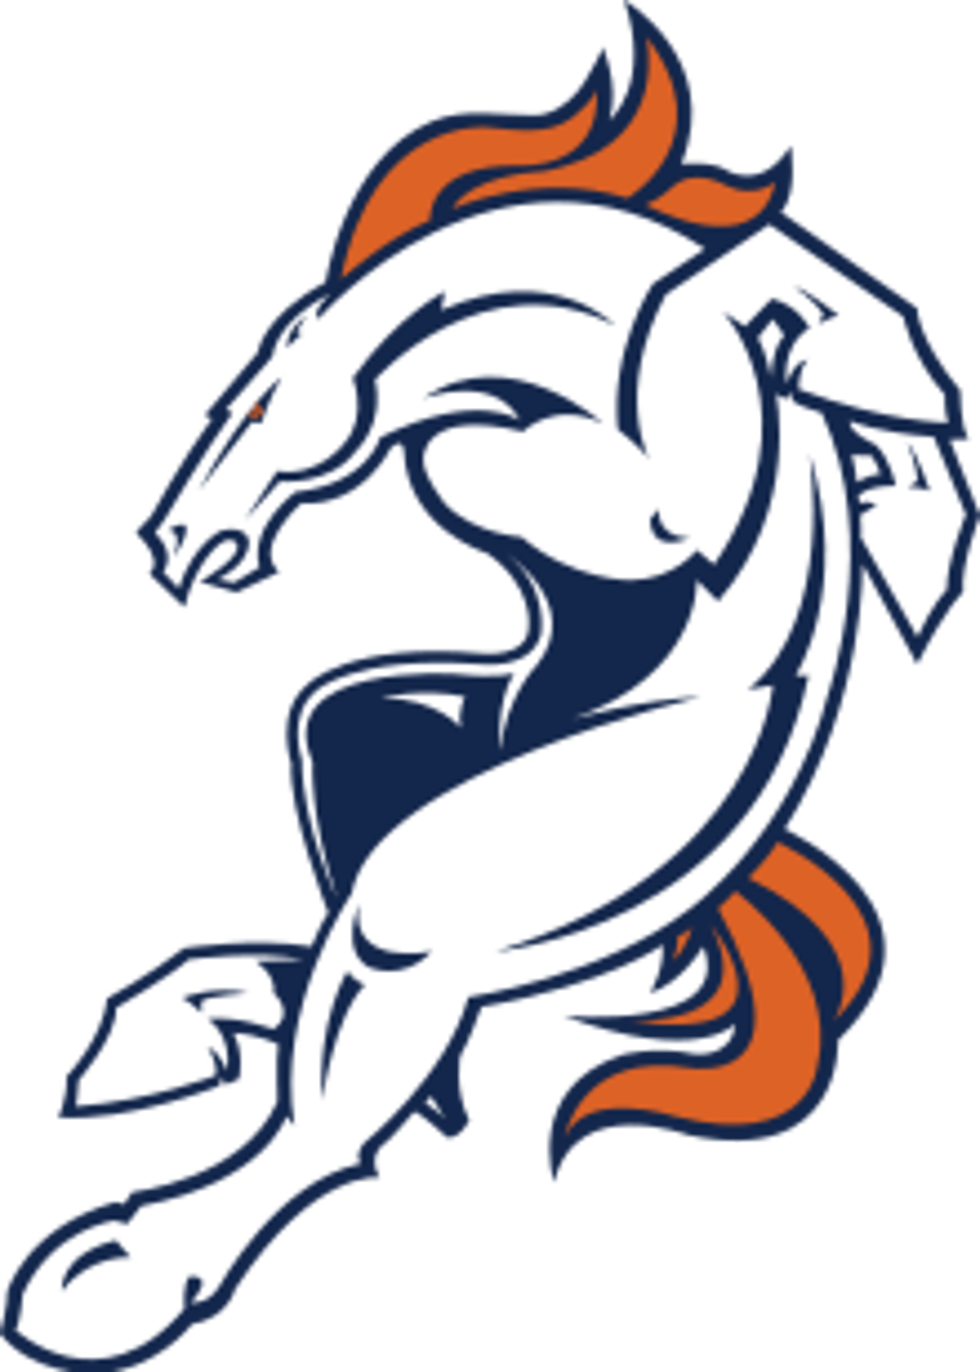 Will The Bronco&#8217;s &#038; Tebow Make the Playoffs?